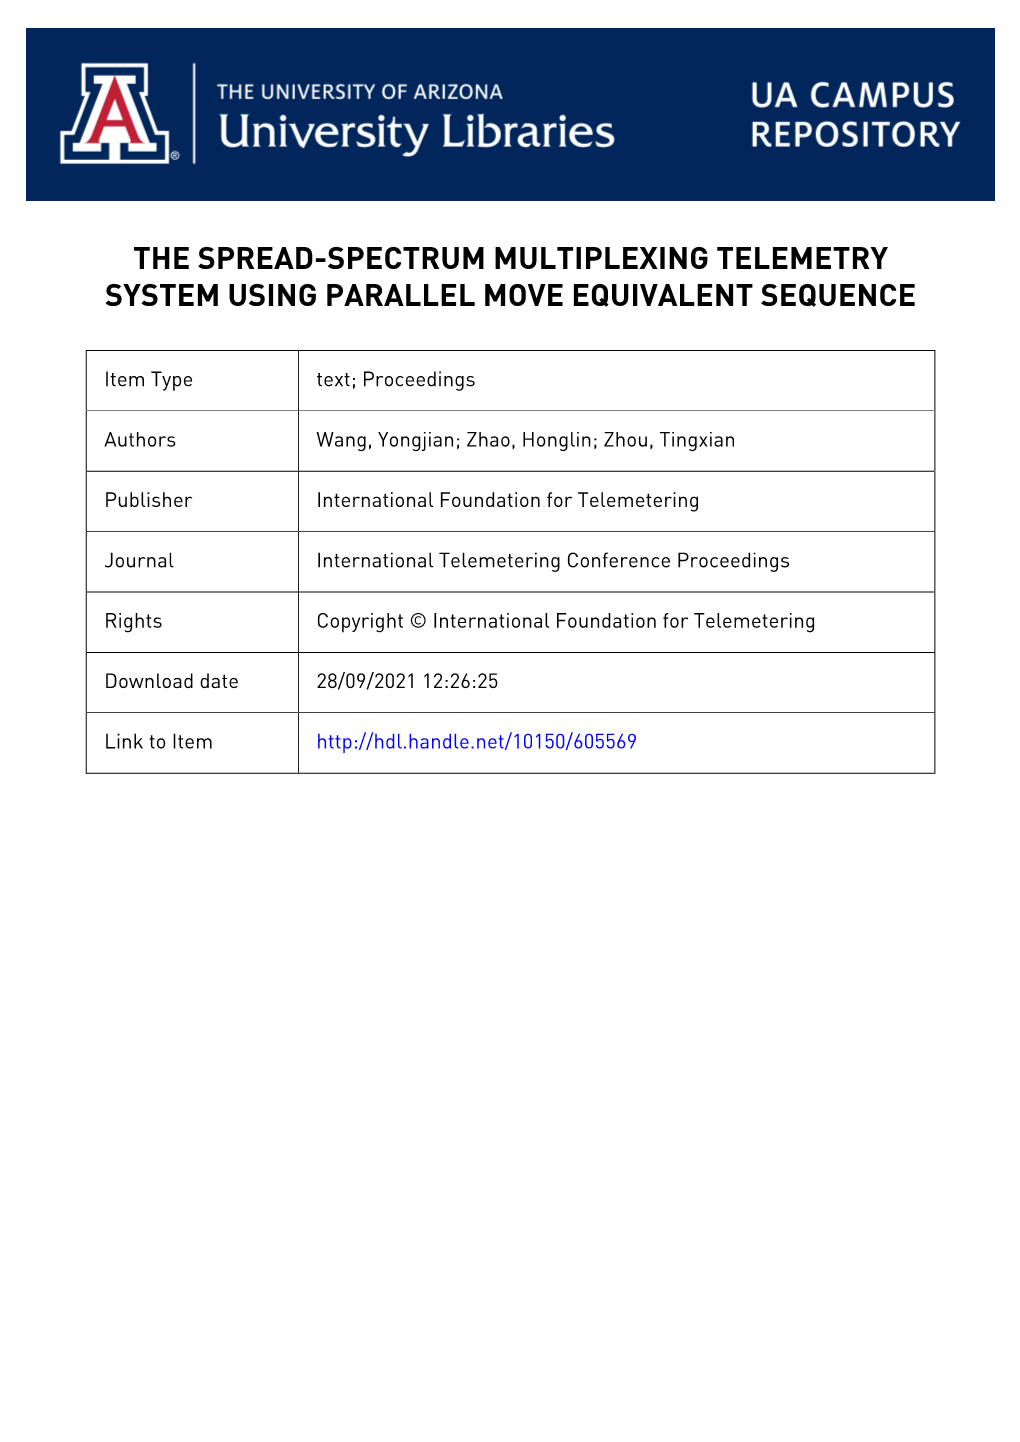 The Spread-Spectrum Multiplexing Telemetry System Using Parallel Move Equivalent Sequence